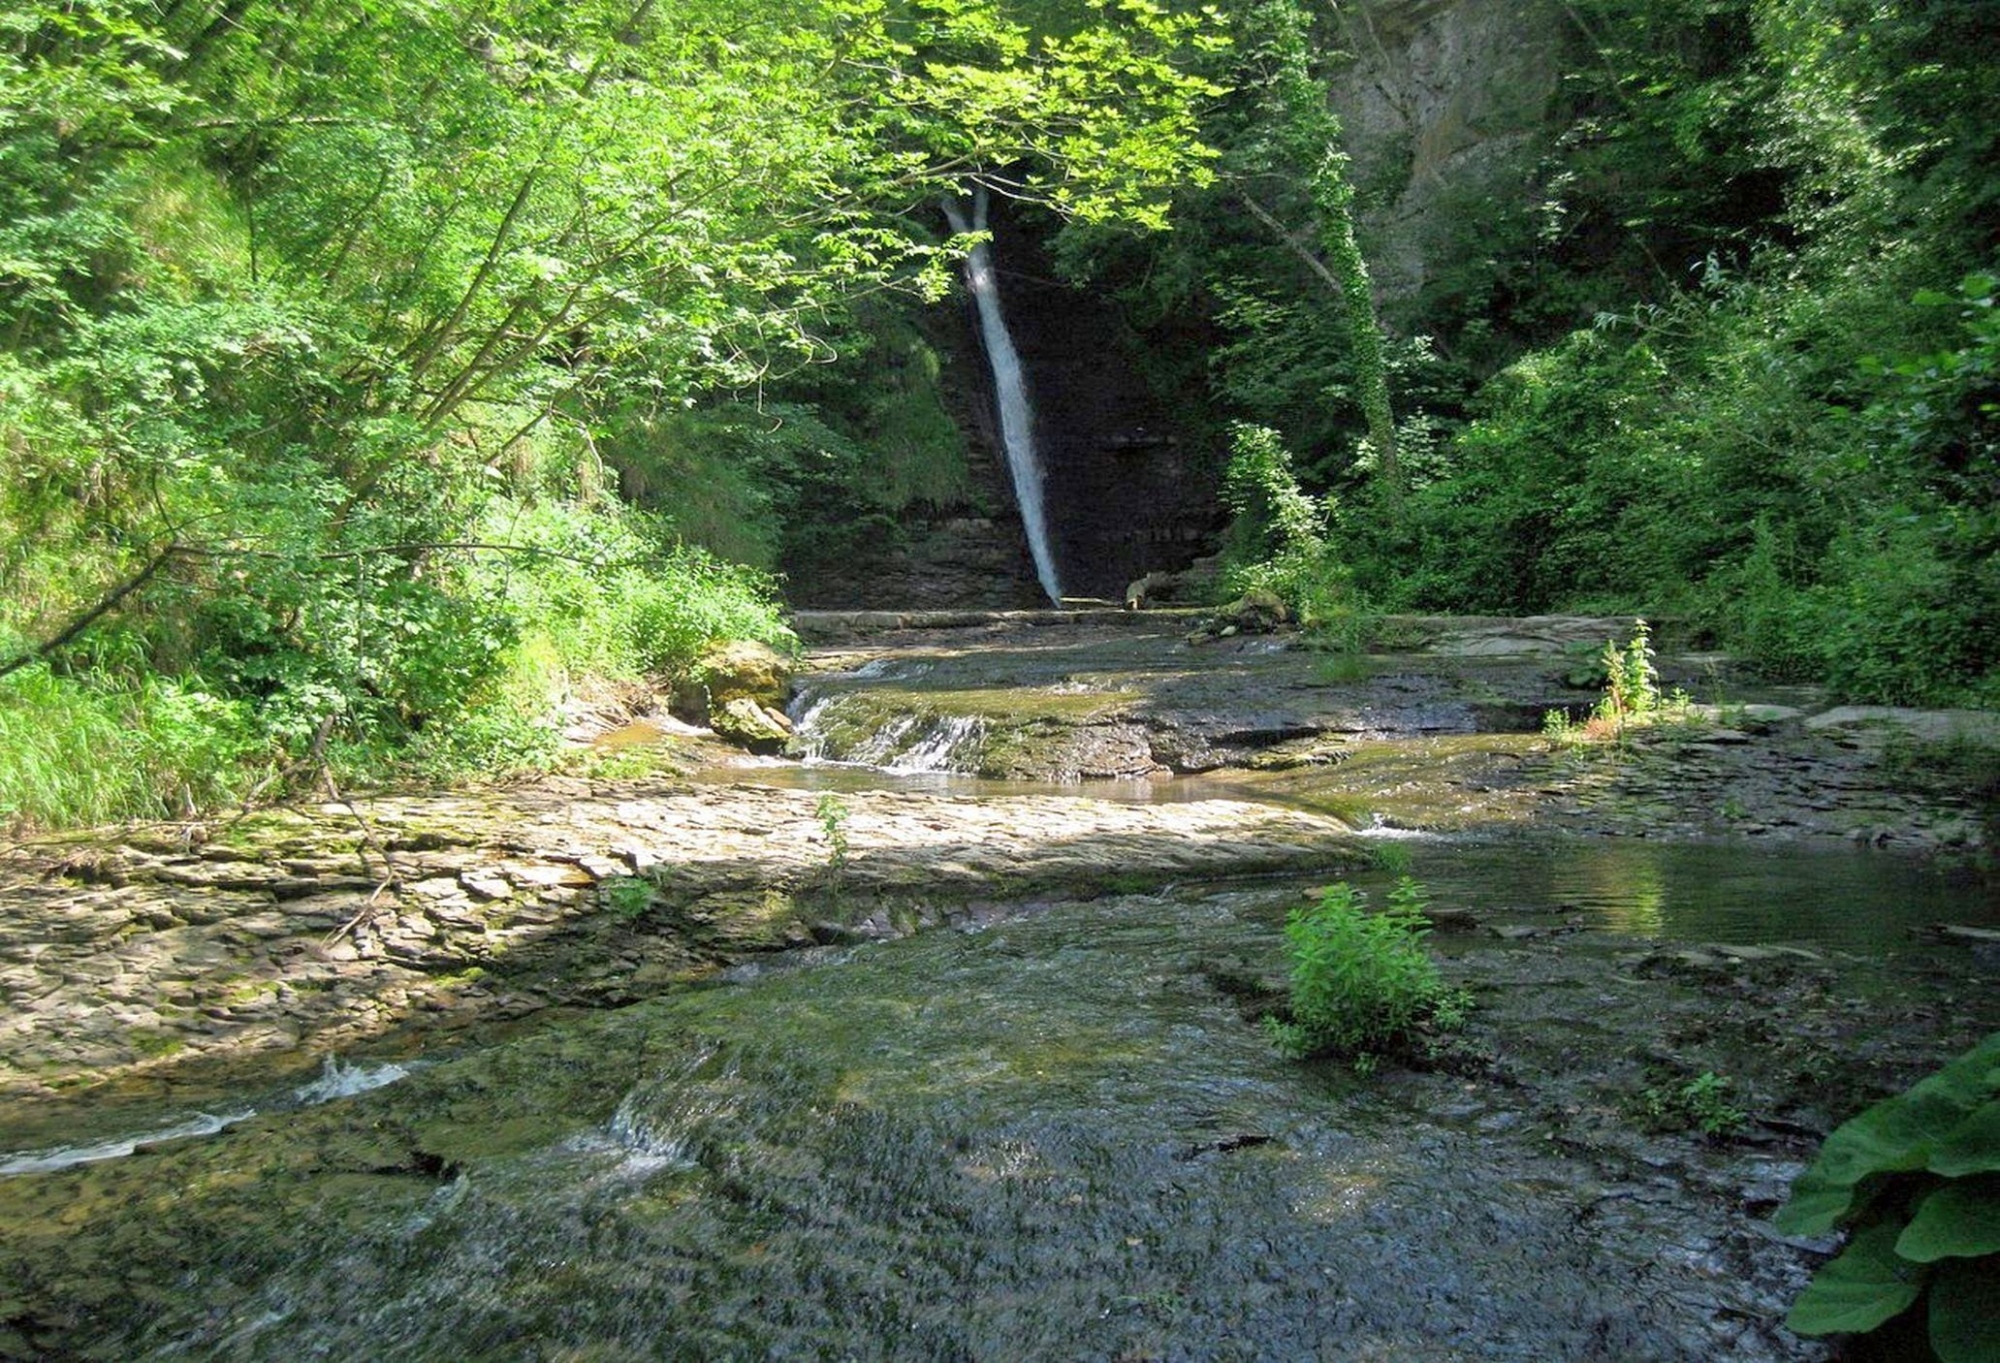 13 km tour to the San Godenzo Falls, in the Casentinesi and Campigna Forests National Park